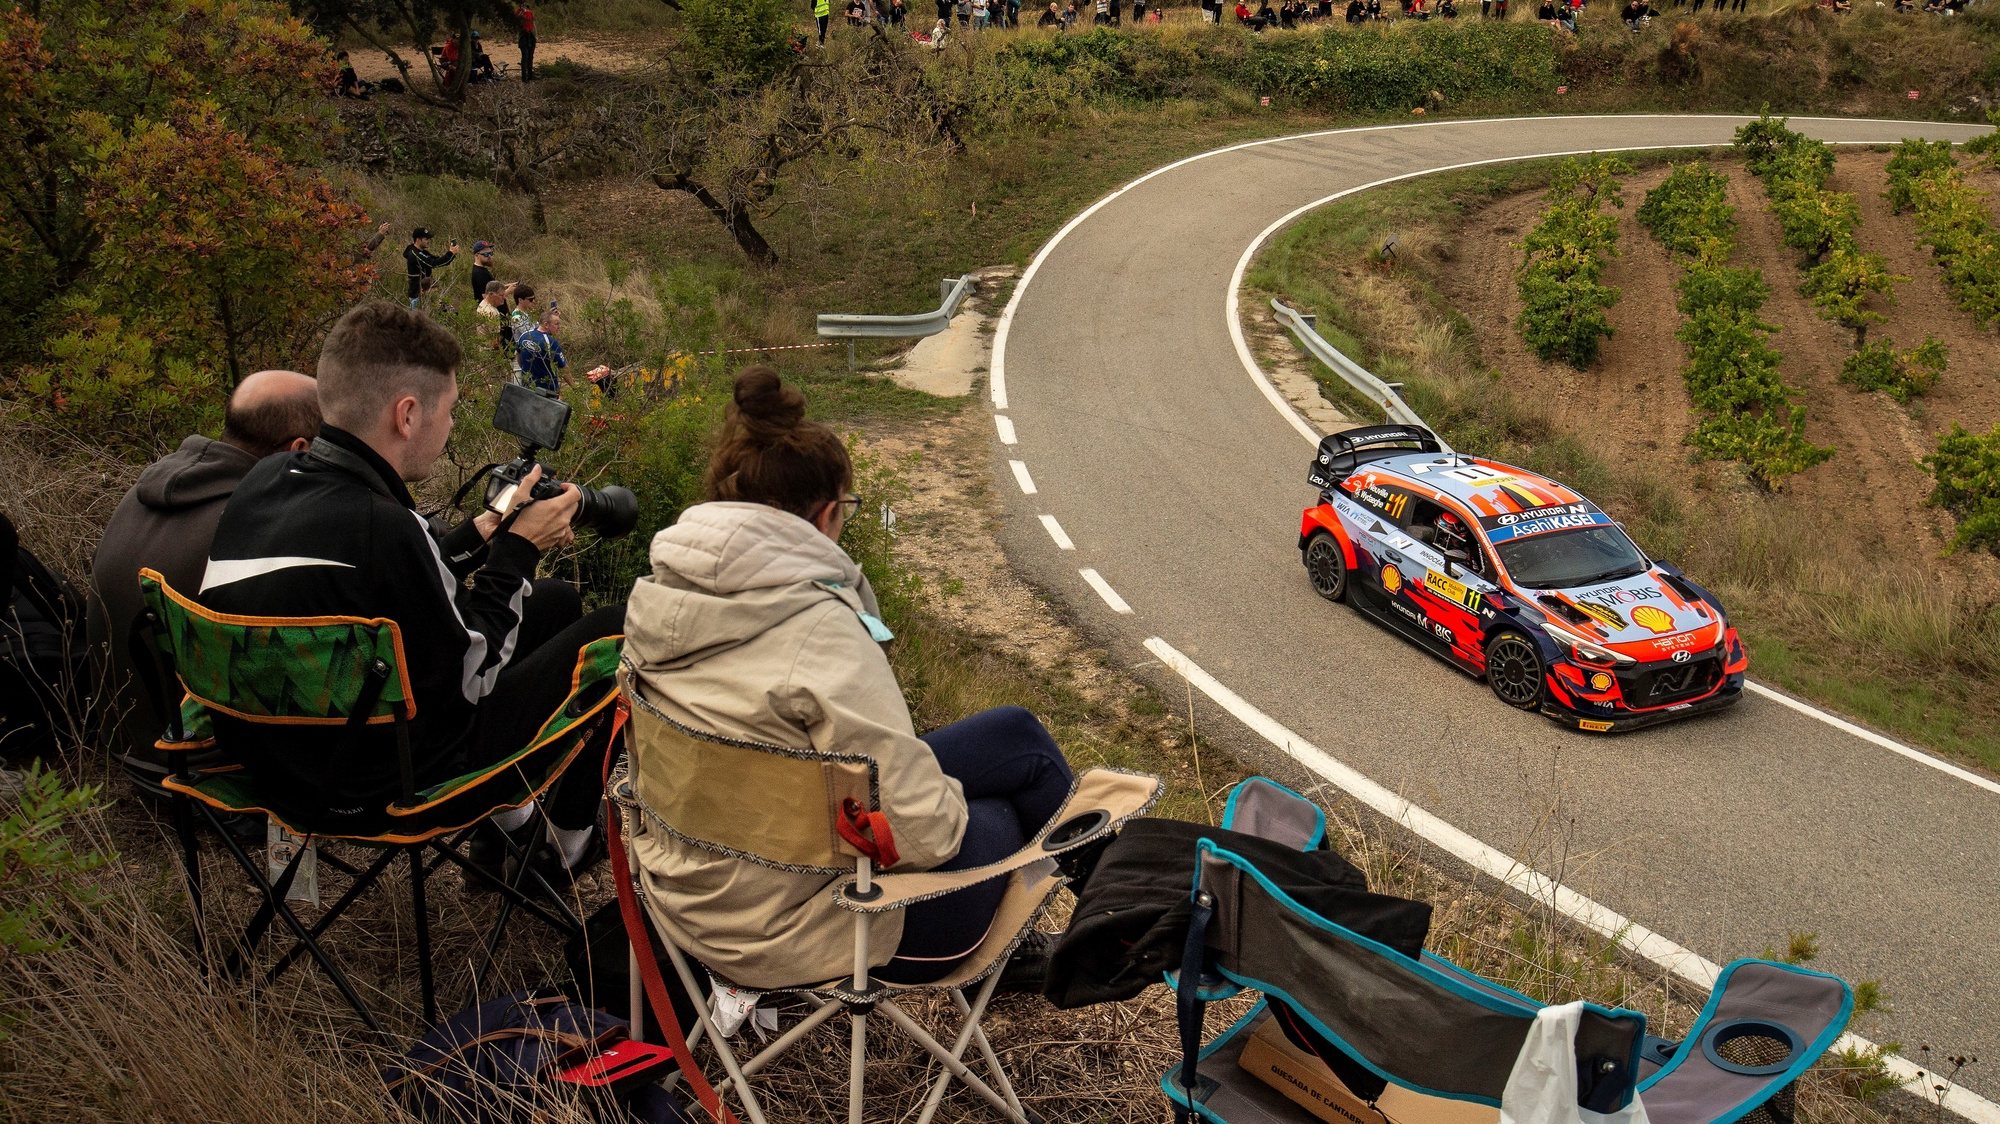 epa09526693 Belgian driver Thierry Neuville, of Hyundai team, competes in the second stage of RACC Rally Cataloniaâ€“Costa Daurada as part of the 2021 World Rally Championship (WRC), in Tarragona, northeastern Spain, 16 October 2021.  EPA/Enric Fontcuberta